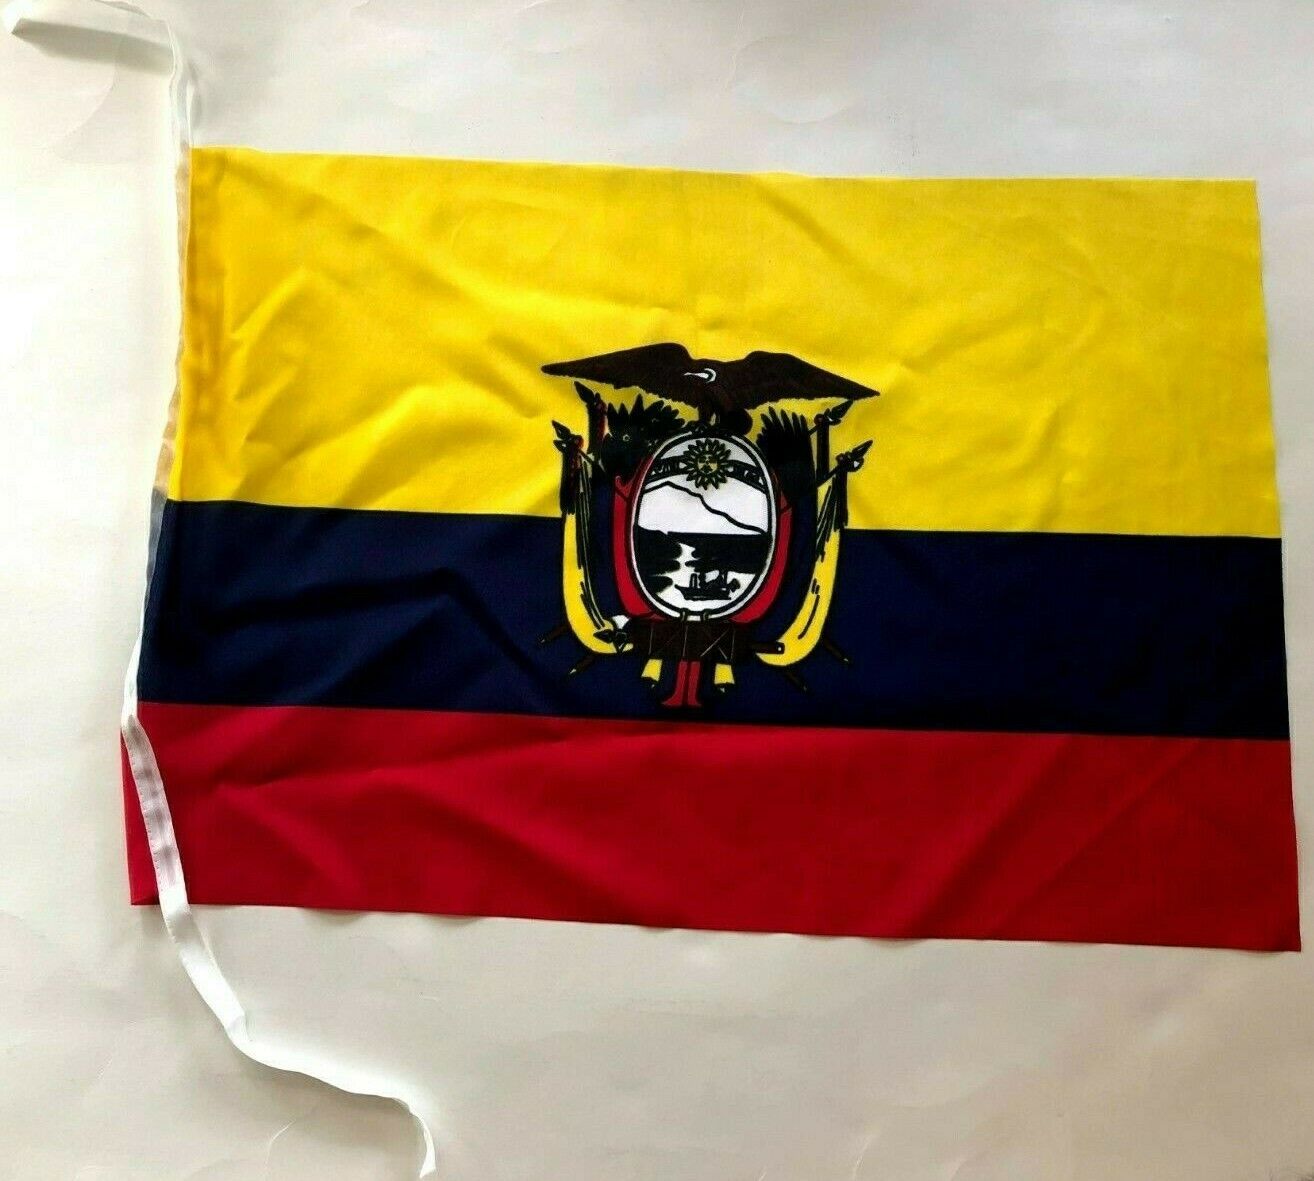 Ecuador 1999 Flag  approximately 17 inches  x 12 inches